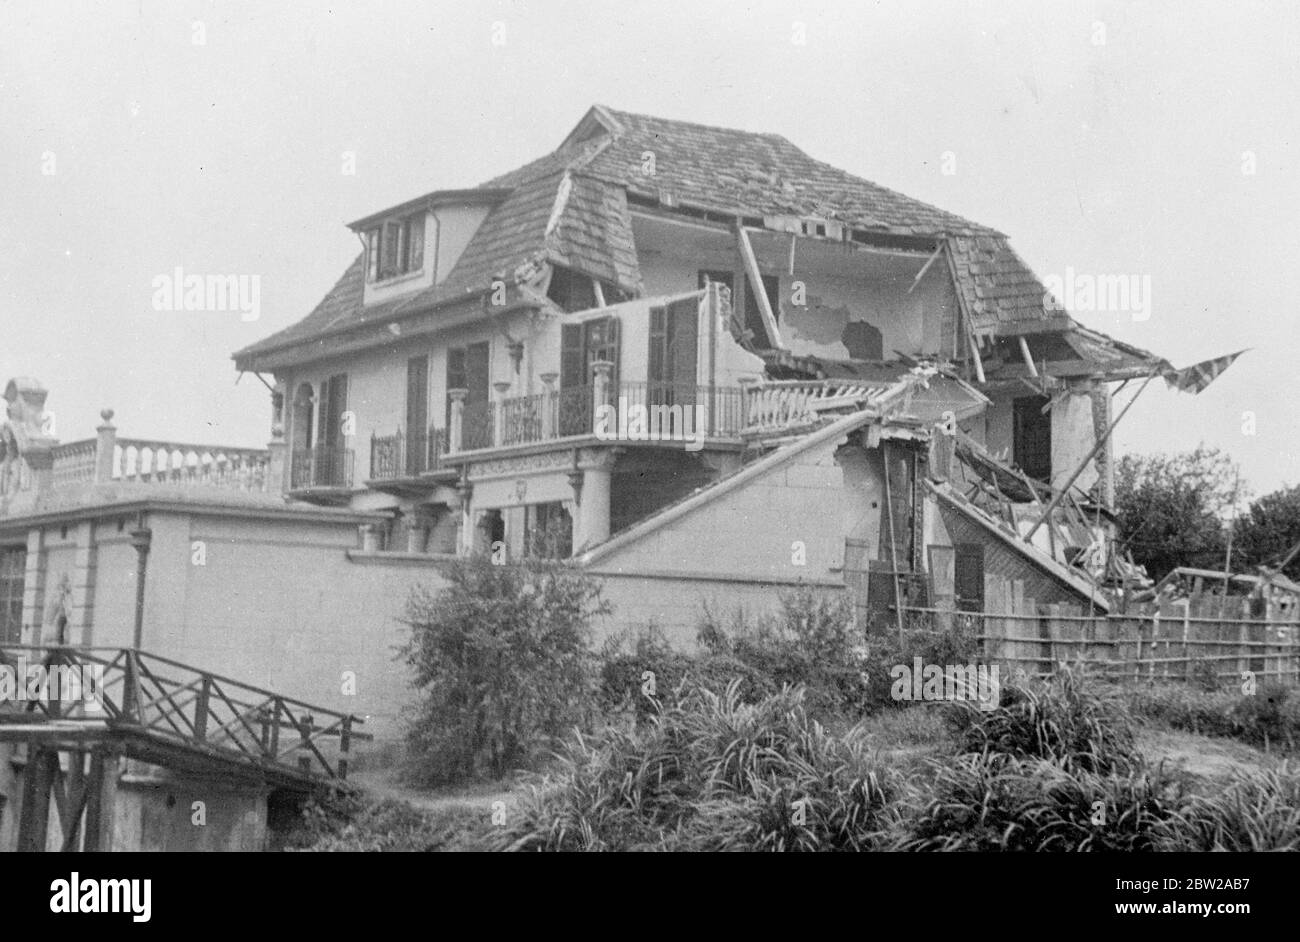 Even Japanese bombs couldn't lower the union Jack. The union Jack still flying from this badly battered home of a British resident in Rubicon Road, Shanghai, ultra-Japanese air raid. The bombs had blown a large part of the house into ruins, but the flag refused to go down, though, is attached to the most severely damaged part of the building. 1 November 1937 Stock Photo